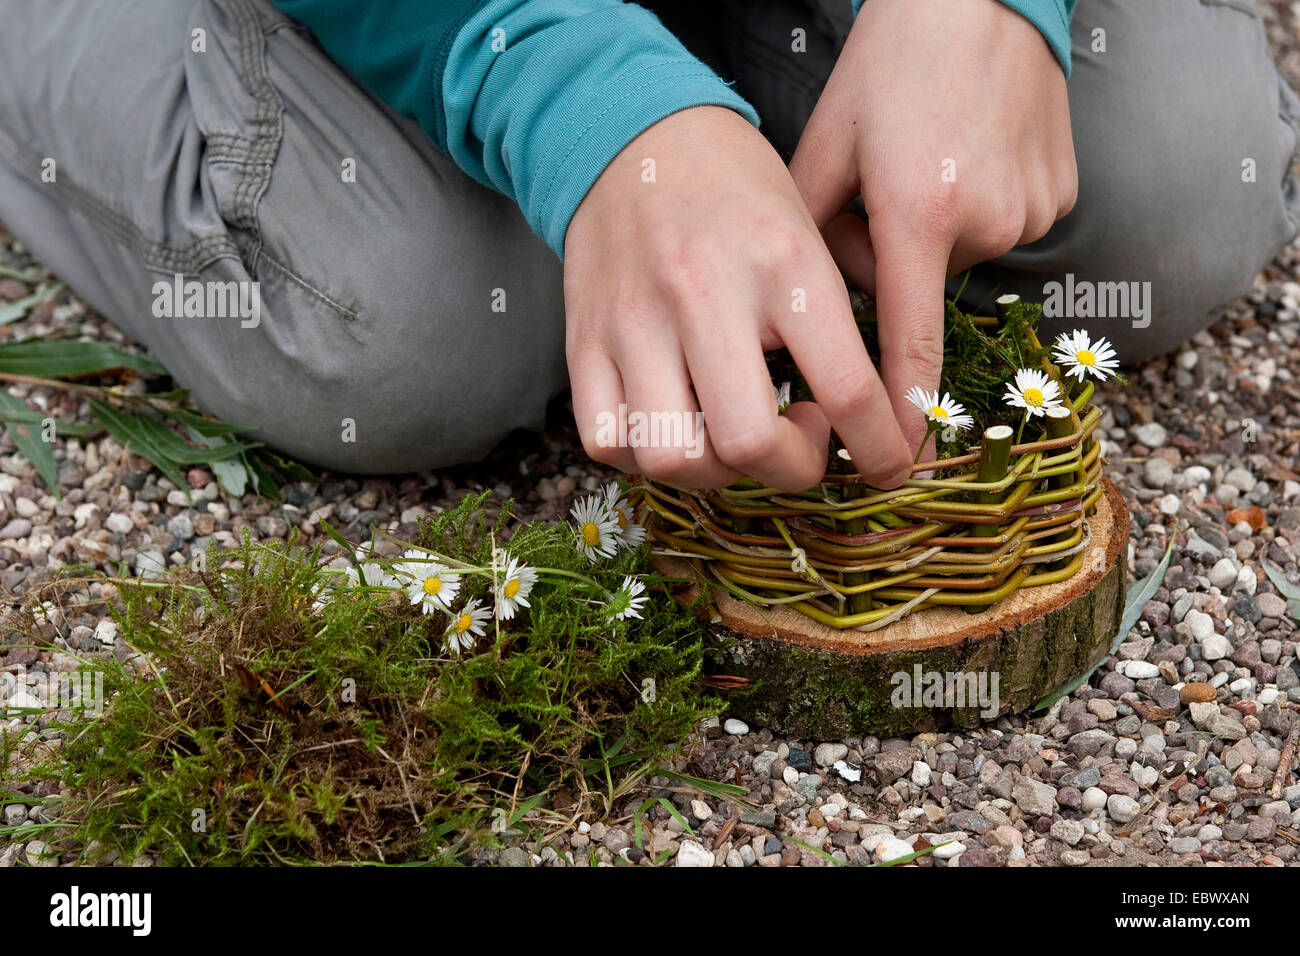 girl building an Easter basket from a tree disc, willow twigs, moss, daisies and coloured eggs; 5. step: adorning the basket with daisies, Germany Stock Photo